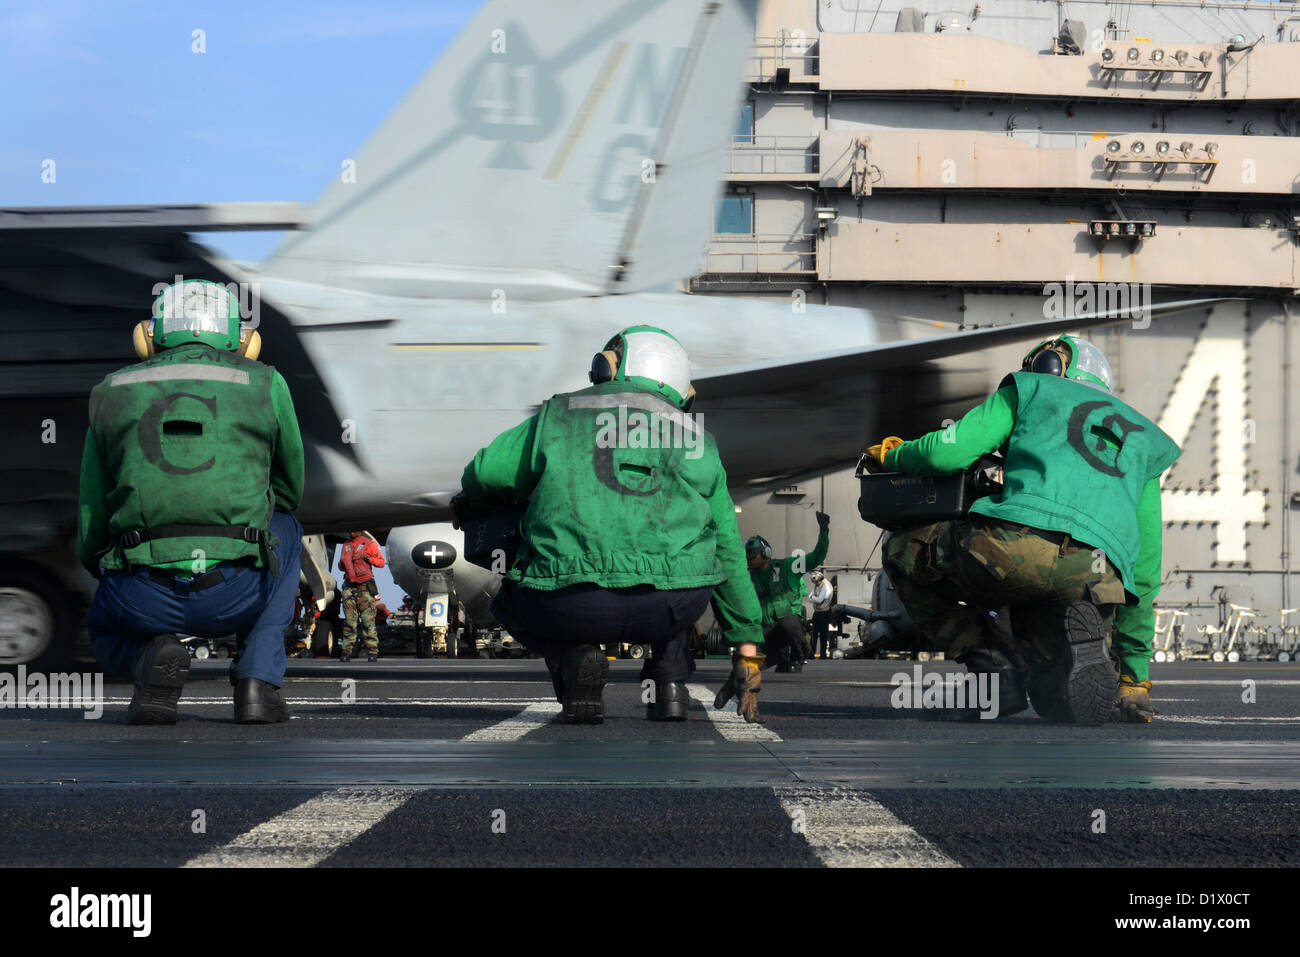 U.S. 5TH FLEET AREA OF RESPONSIBILITY (JAN  7, 2013) - Sailors observe as an F/A-18F Super Hornet of the Black Aces of Strike Fighter Squadron (VFA) 41 is launched from the flight deck of aircraft carrier USS John C. Stennis (CVN 74). John C. Stennis is deployed to the U.S. 5th Fleet area of responsibility conducting maritime security operations, theater security cooperation efforts and support missions for Operation Enduring Freedom. (U.S. Navy photo by Mass Communication Specialist 2nd Class Kenneth Abbate/Released) Stock Photo